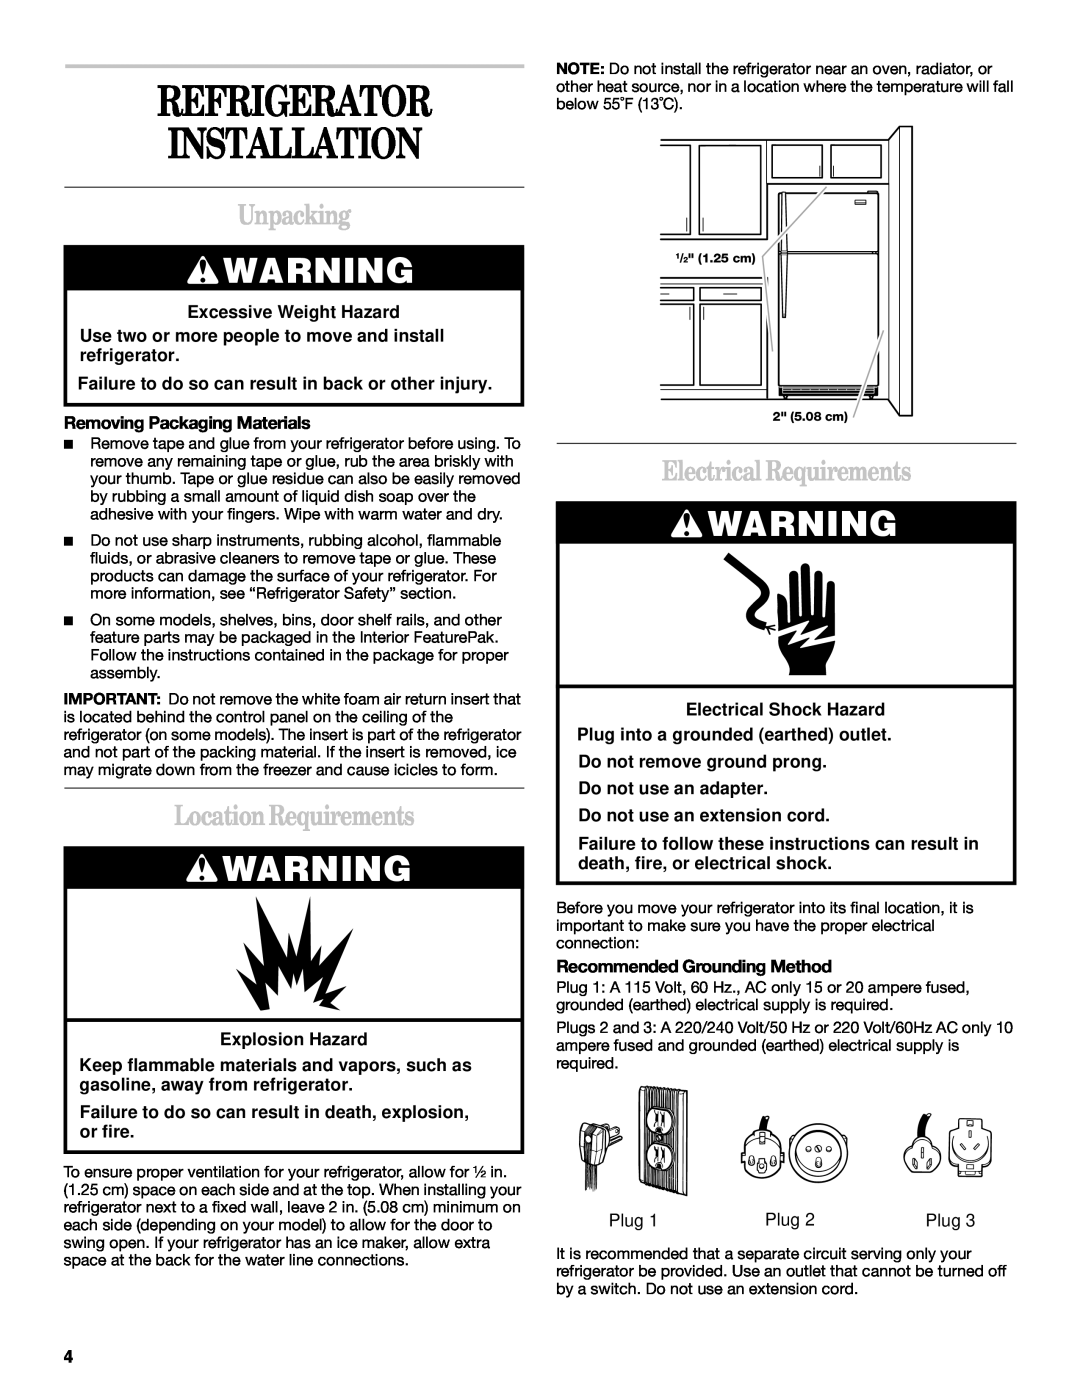 Whirlpool 2218585 Refrigerator Installation, Unpacking, Location Requirements, Electrical Requirements, Explosion Hazard 